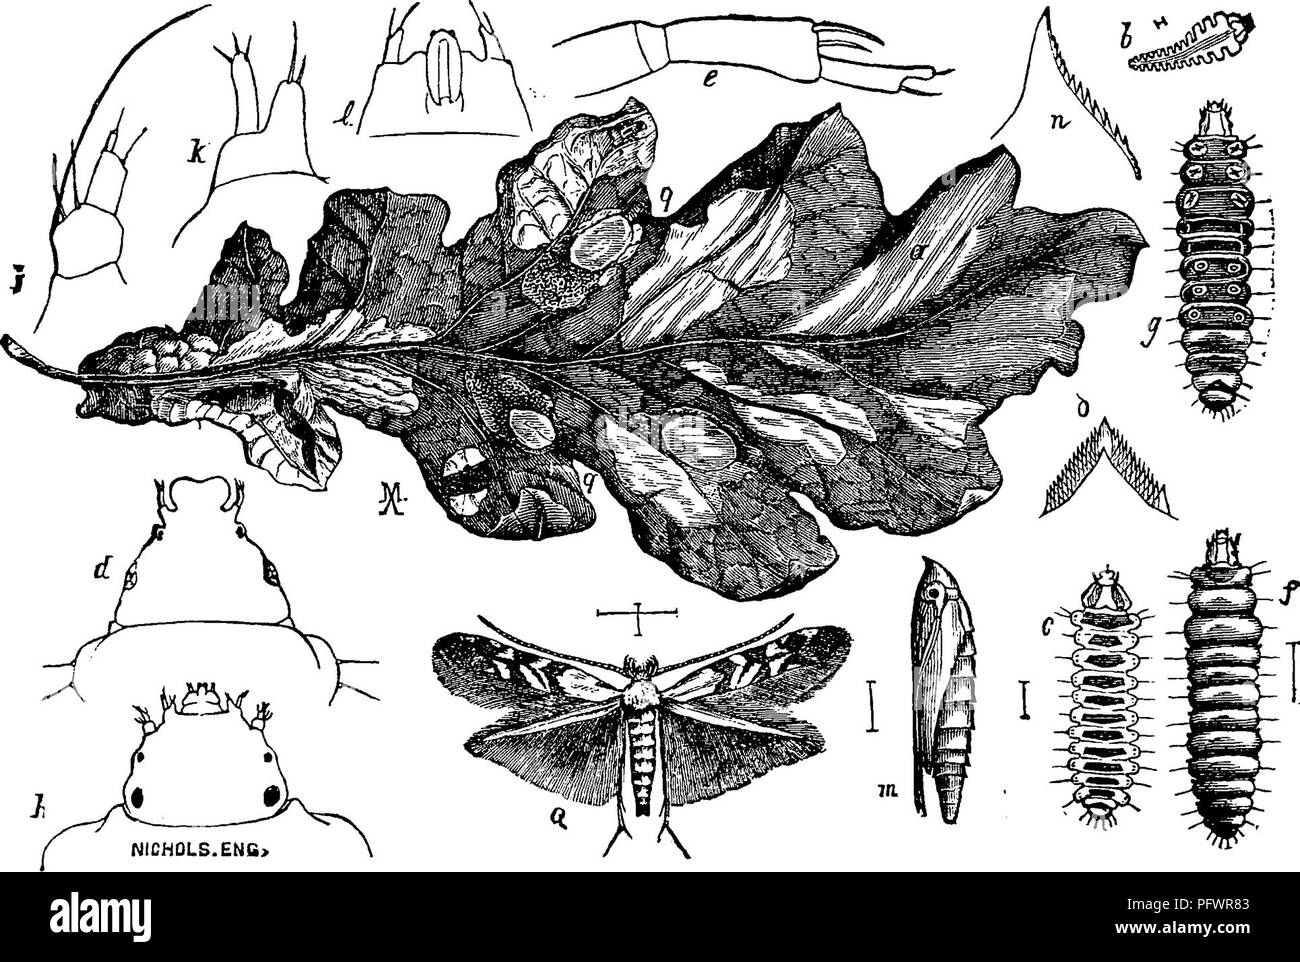 . A manual for the study of insects. Insects. 250 THE STUDY OF INSECTS, mines. In some of the blotch mines the epidermis of one side of the leaf is thrown into a fold by the growth of the leaf; these are tentiform mines. In addition to peculiarities in shape many mines are marked by characteristic lines or spots composed of the droppings of the larva. The following species will serve to illustrate the habits of these remarkable insects. The White-blotch Oak-leaf Miner, Lithocolletis hamadrya- della (Lith-o-col-le^tis ha-mad-ry-a-deria).—This little miner infests the leaves of many different sp Stock Photo